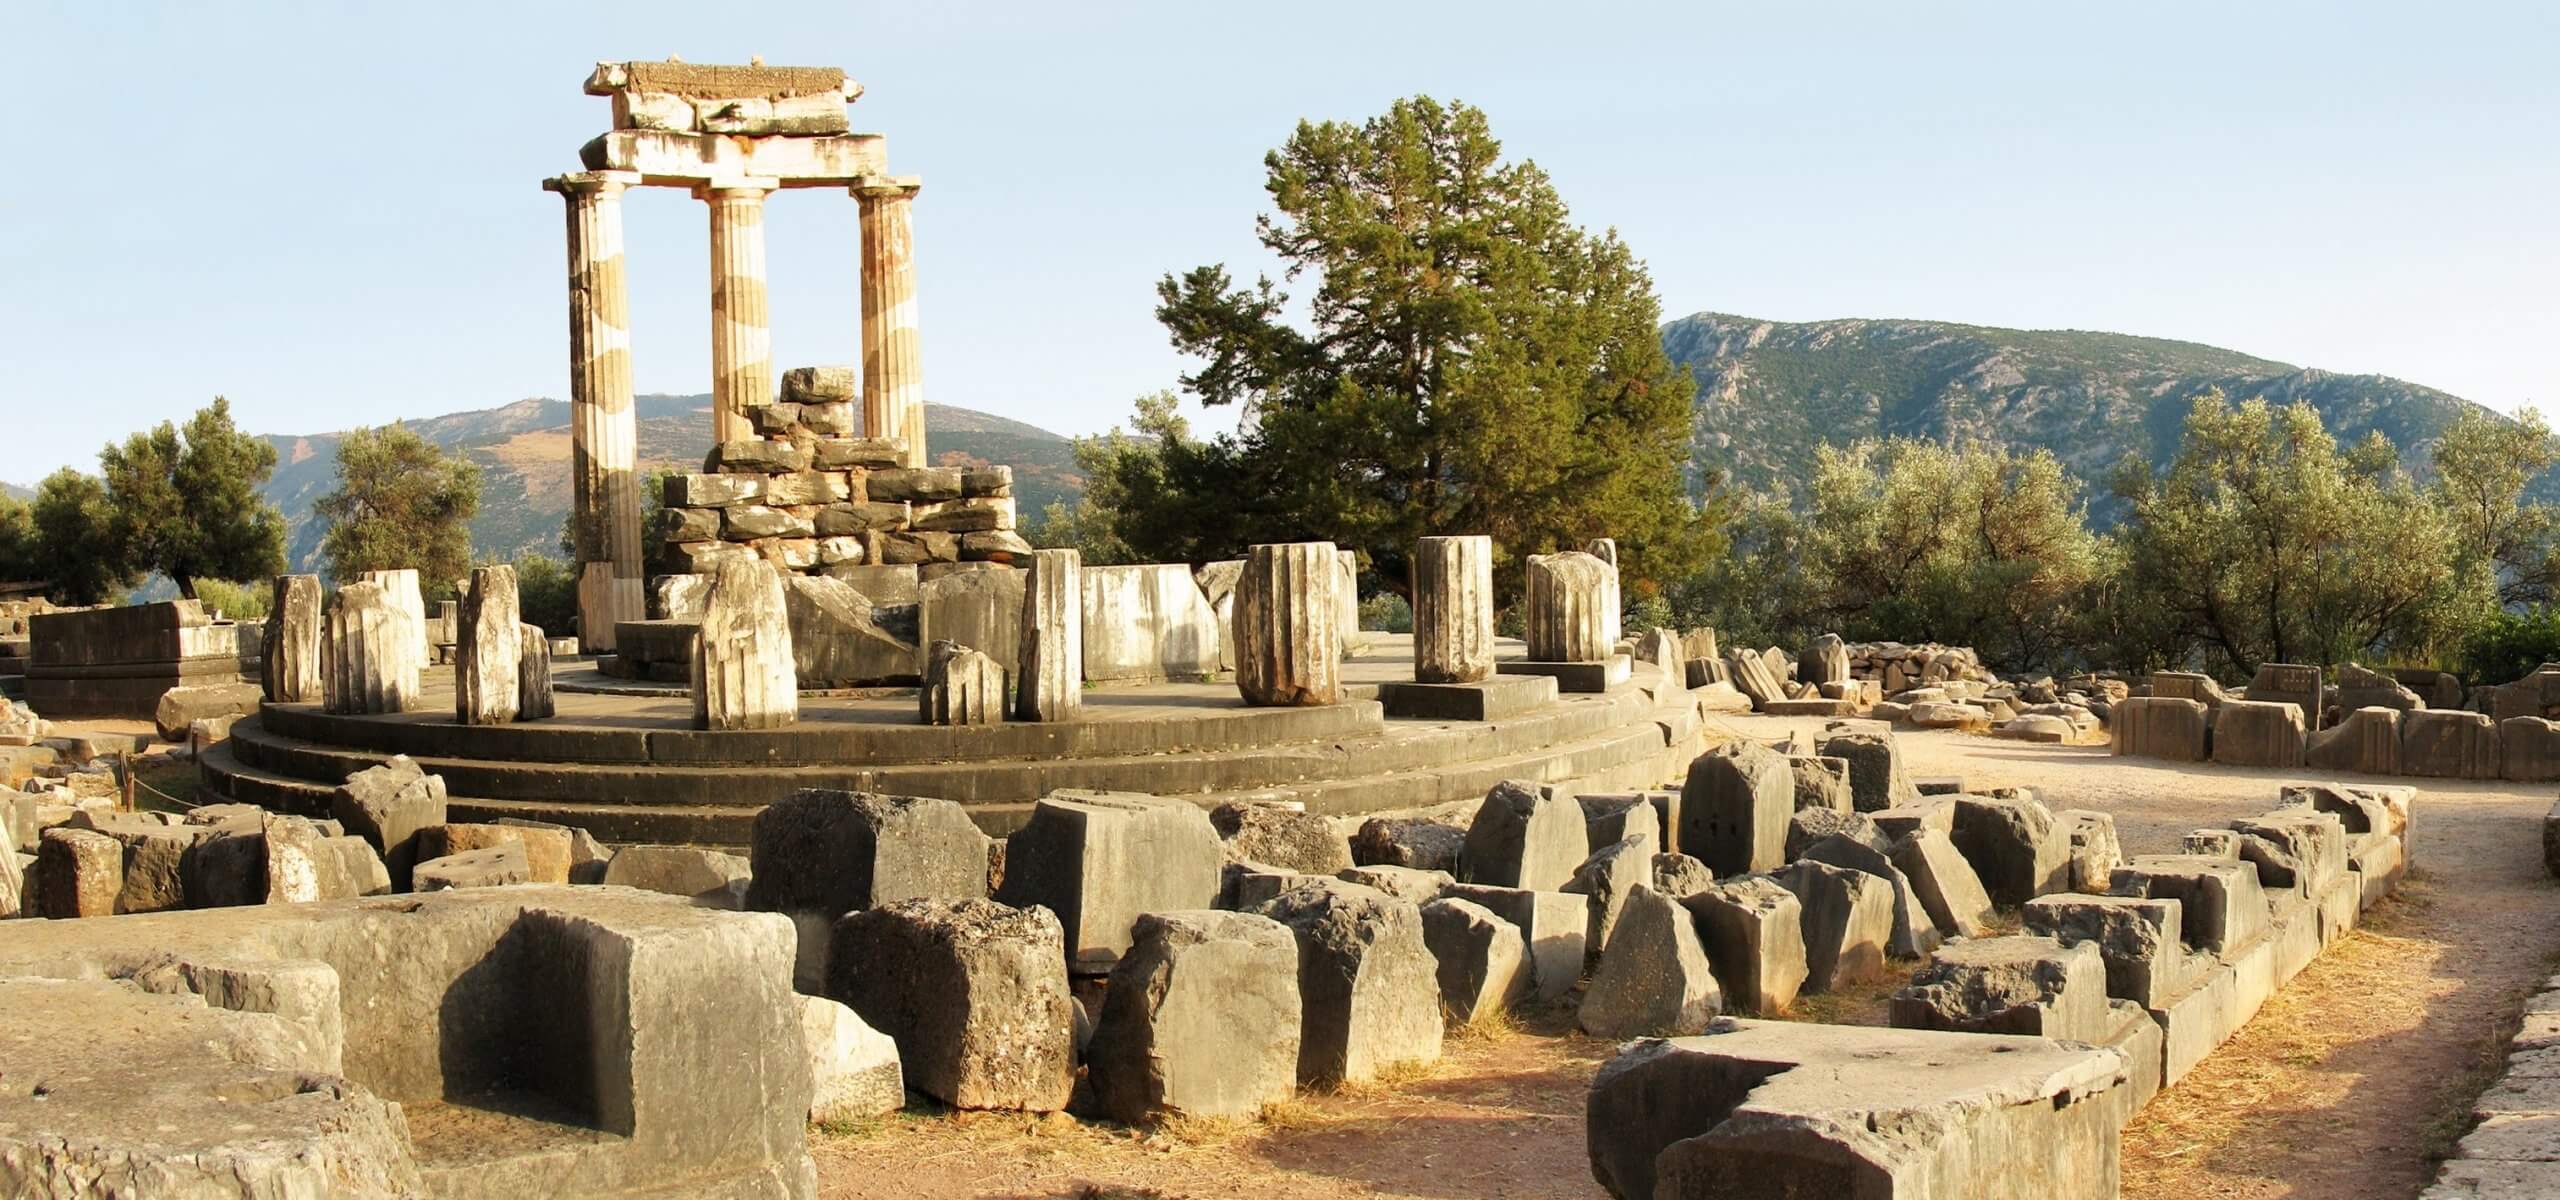 The Oracle of Delphi: A Detailed Guide for Visitors